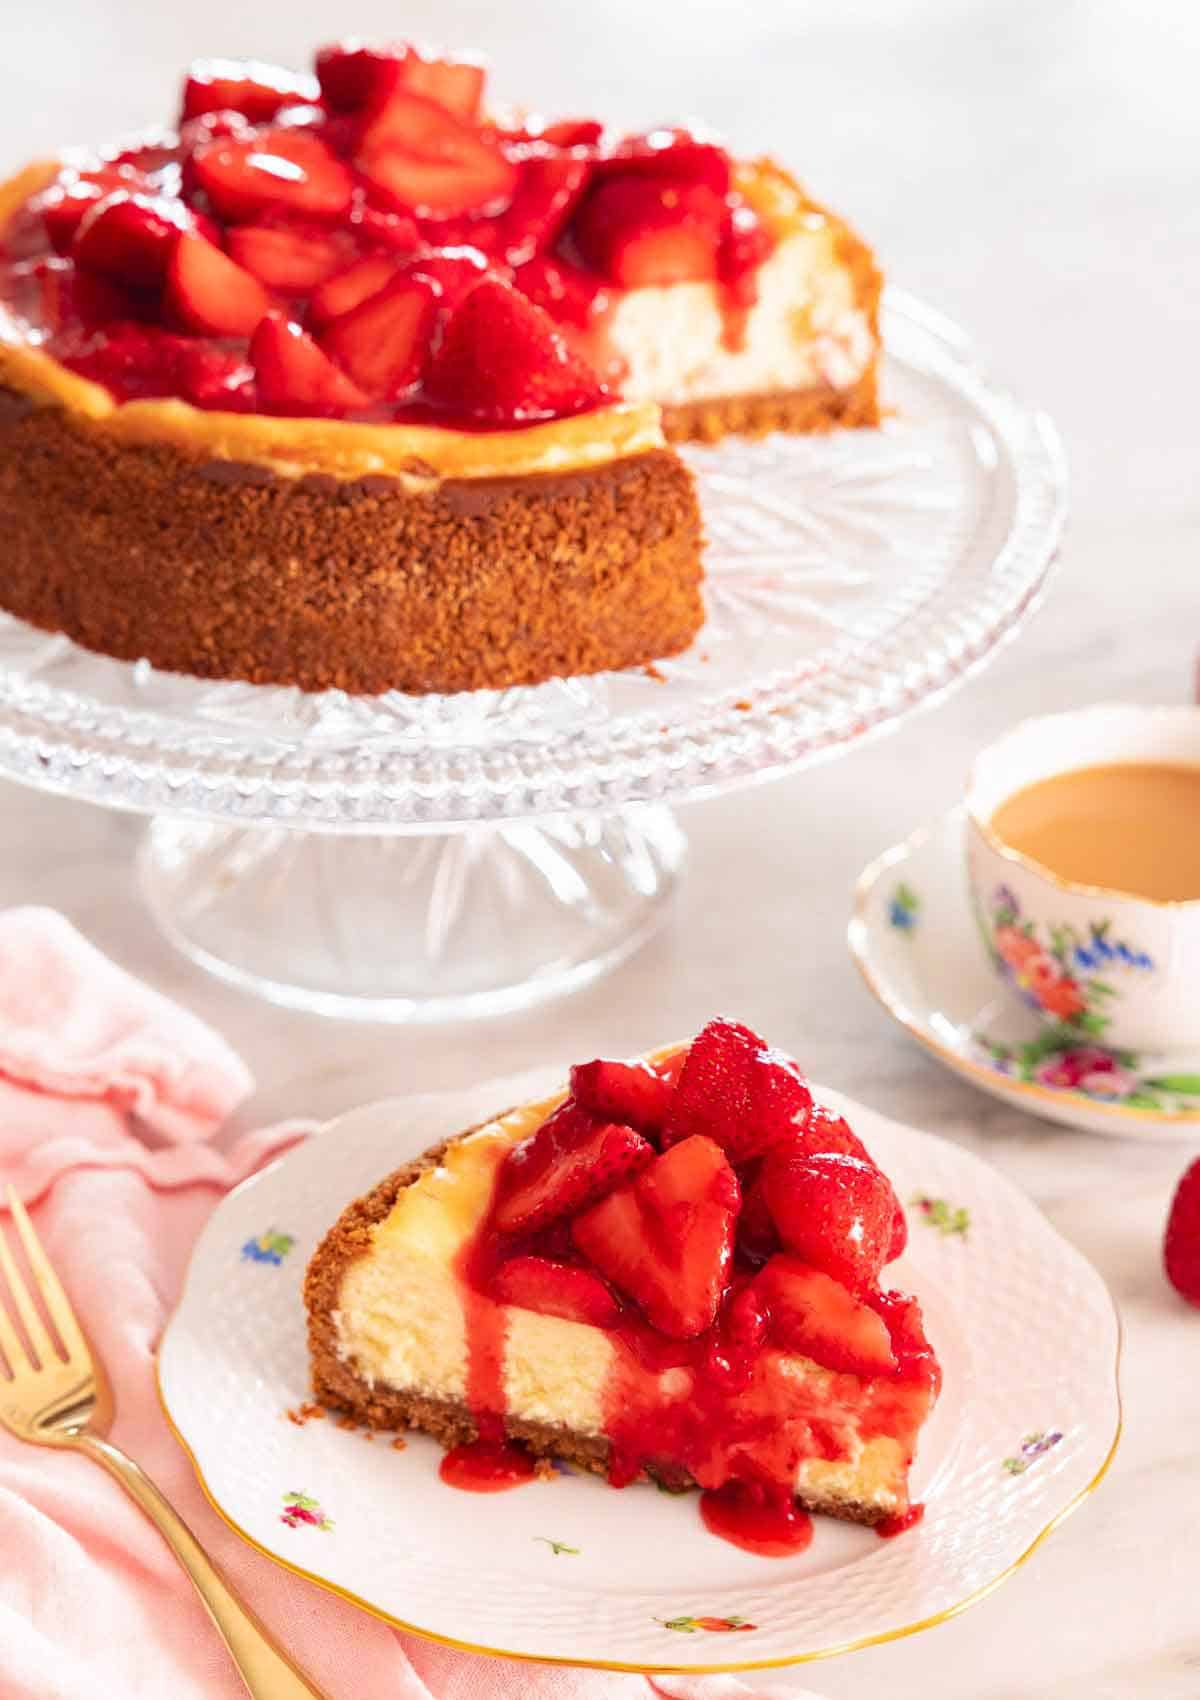 A slice of strawberry cheesecake with the syrup dripping off it, in front of a cake stand with the rest of the cheesecake.